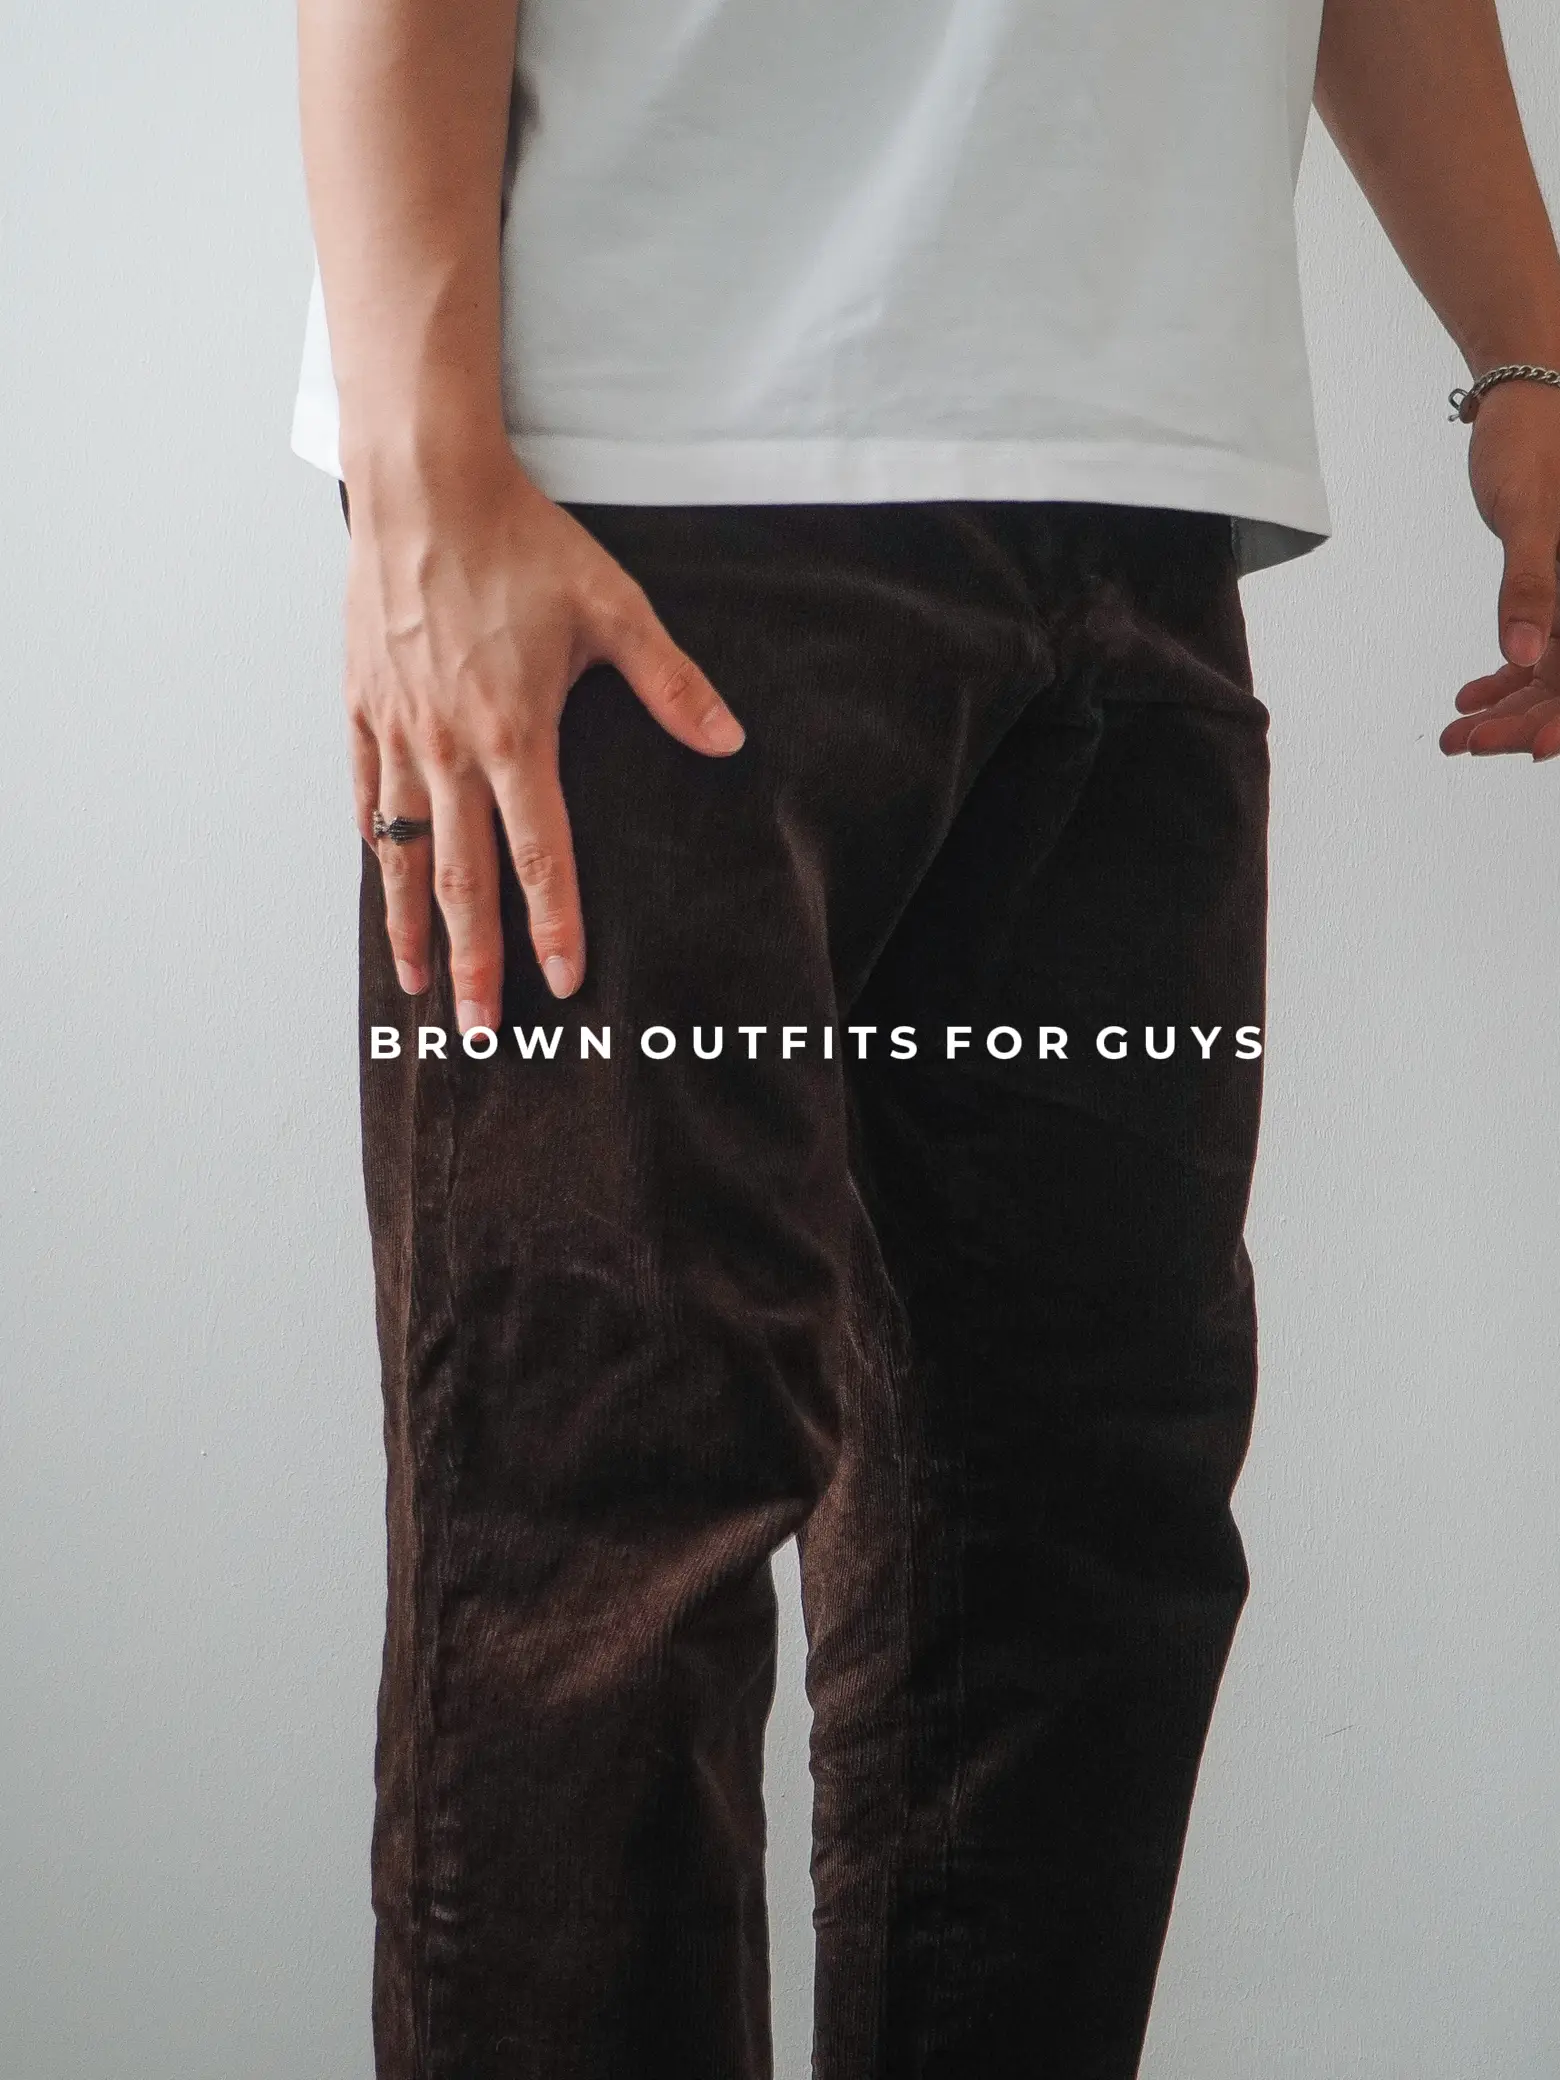 Fall Outfit Idea: Styling Brown Corduroy Pants - Add Textures to Spice up  your Fall Outfits with Cozy Knits and Corduroy Pants - 👕: @a